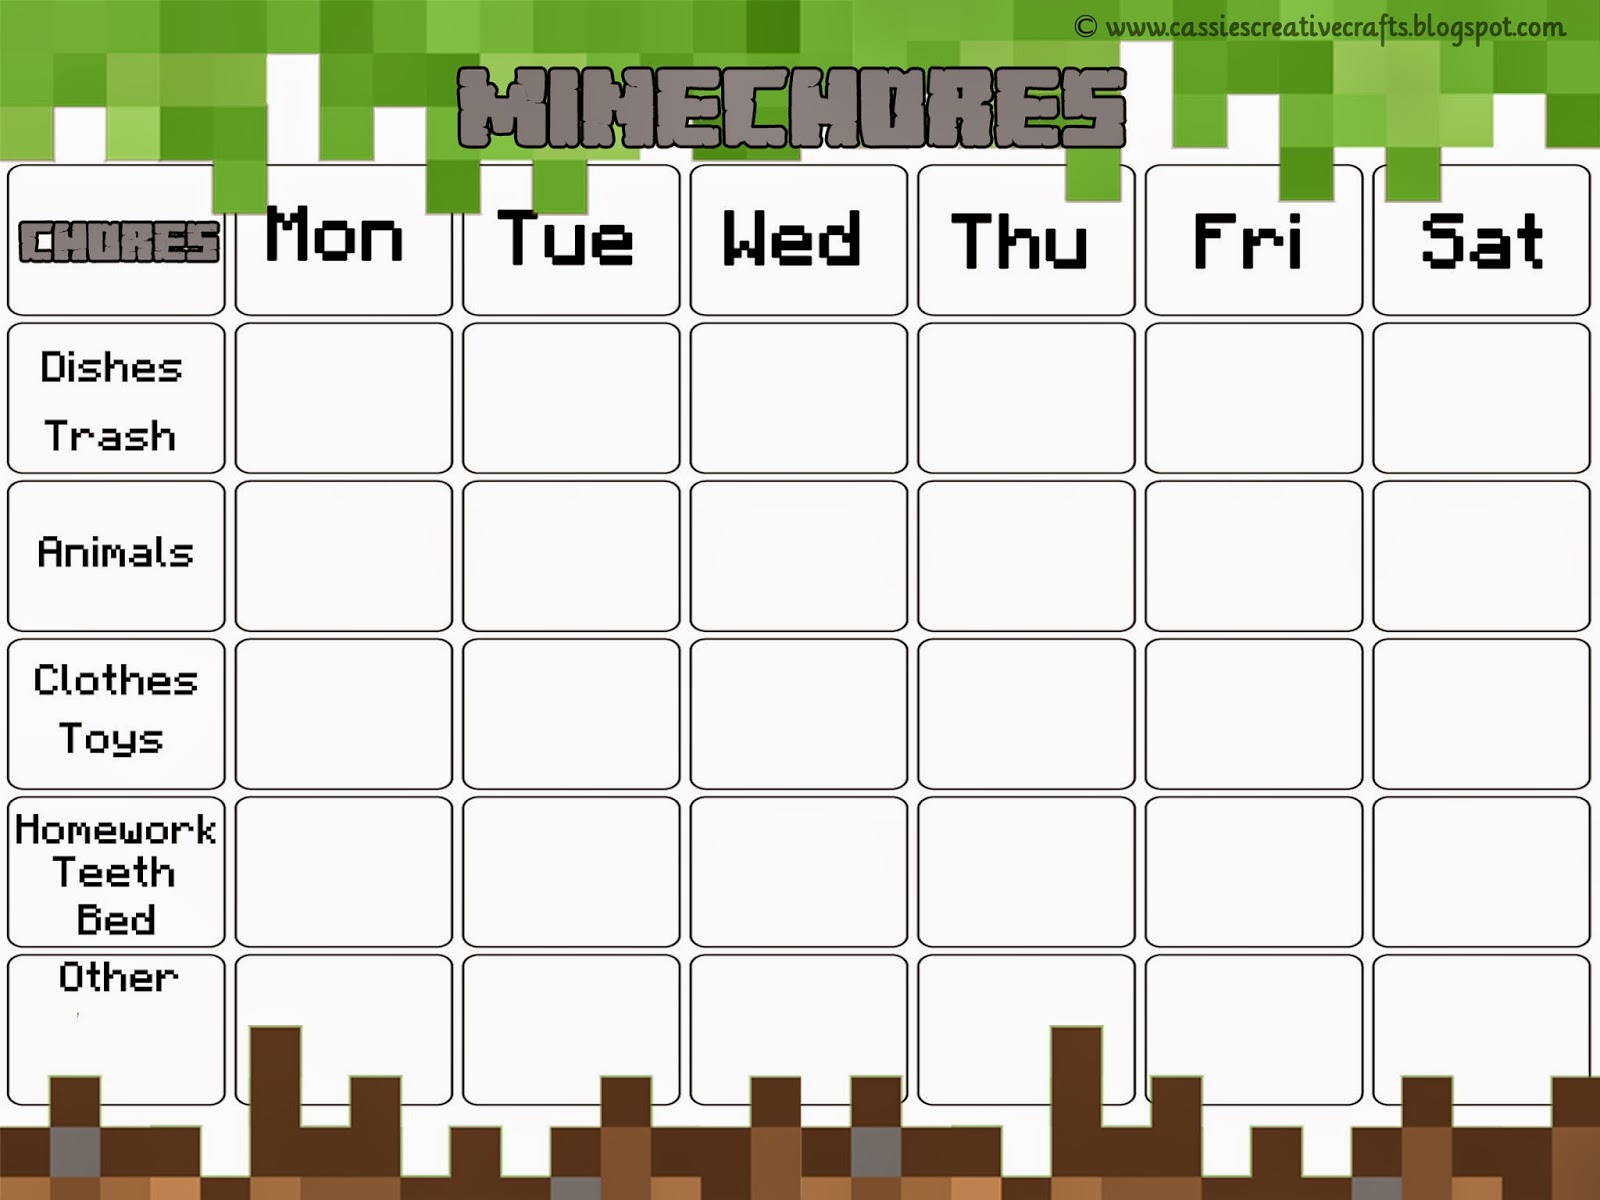 Download Cassie's Creative Crafts: Free Minecraft Chore Chart & Award System with Printables